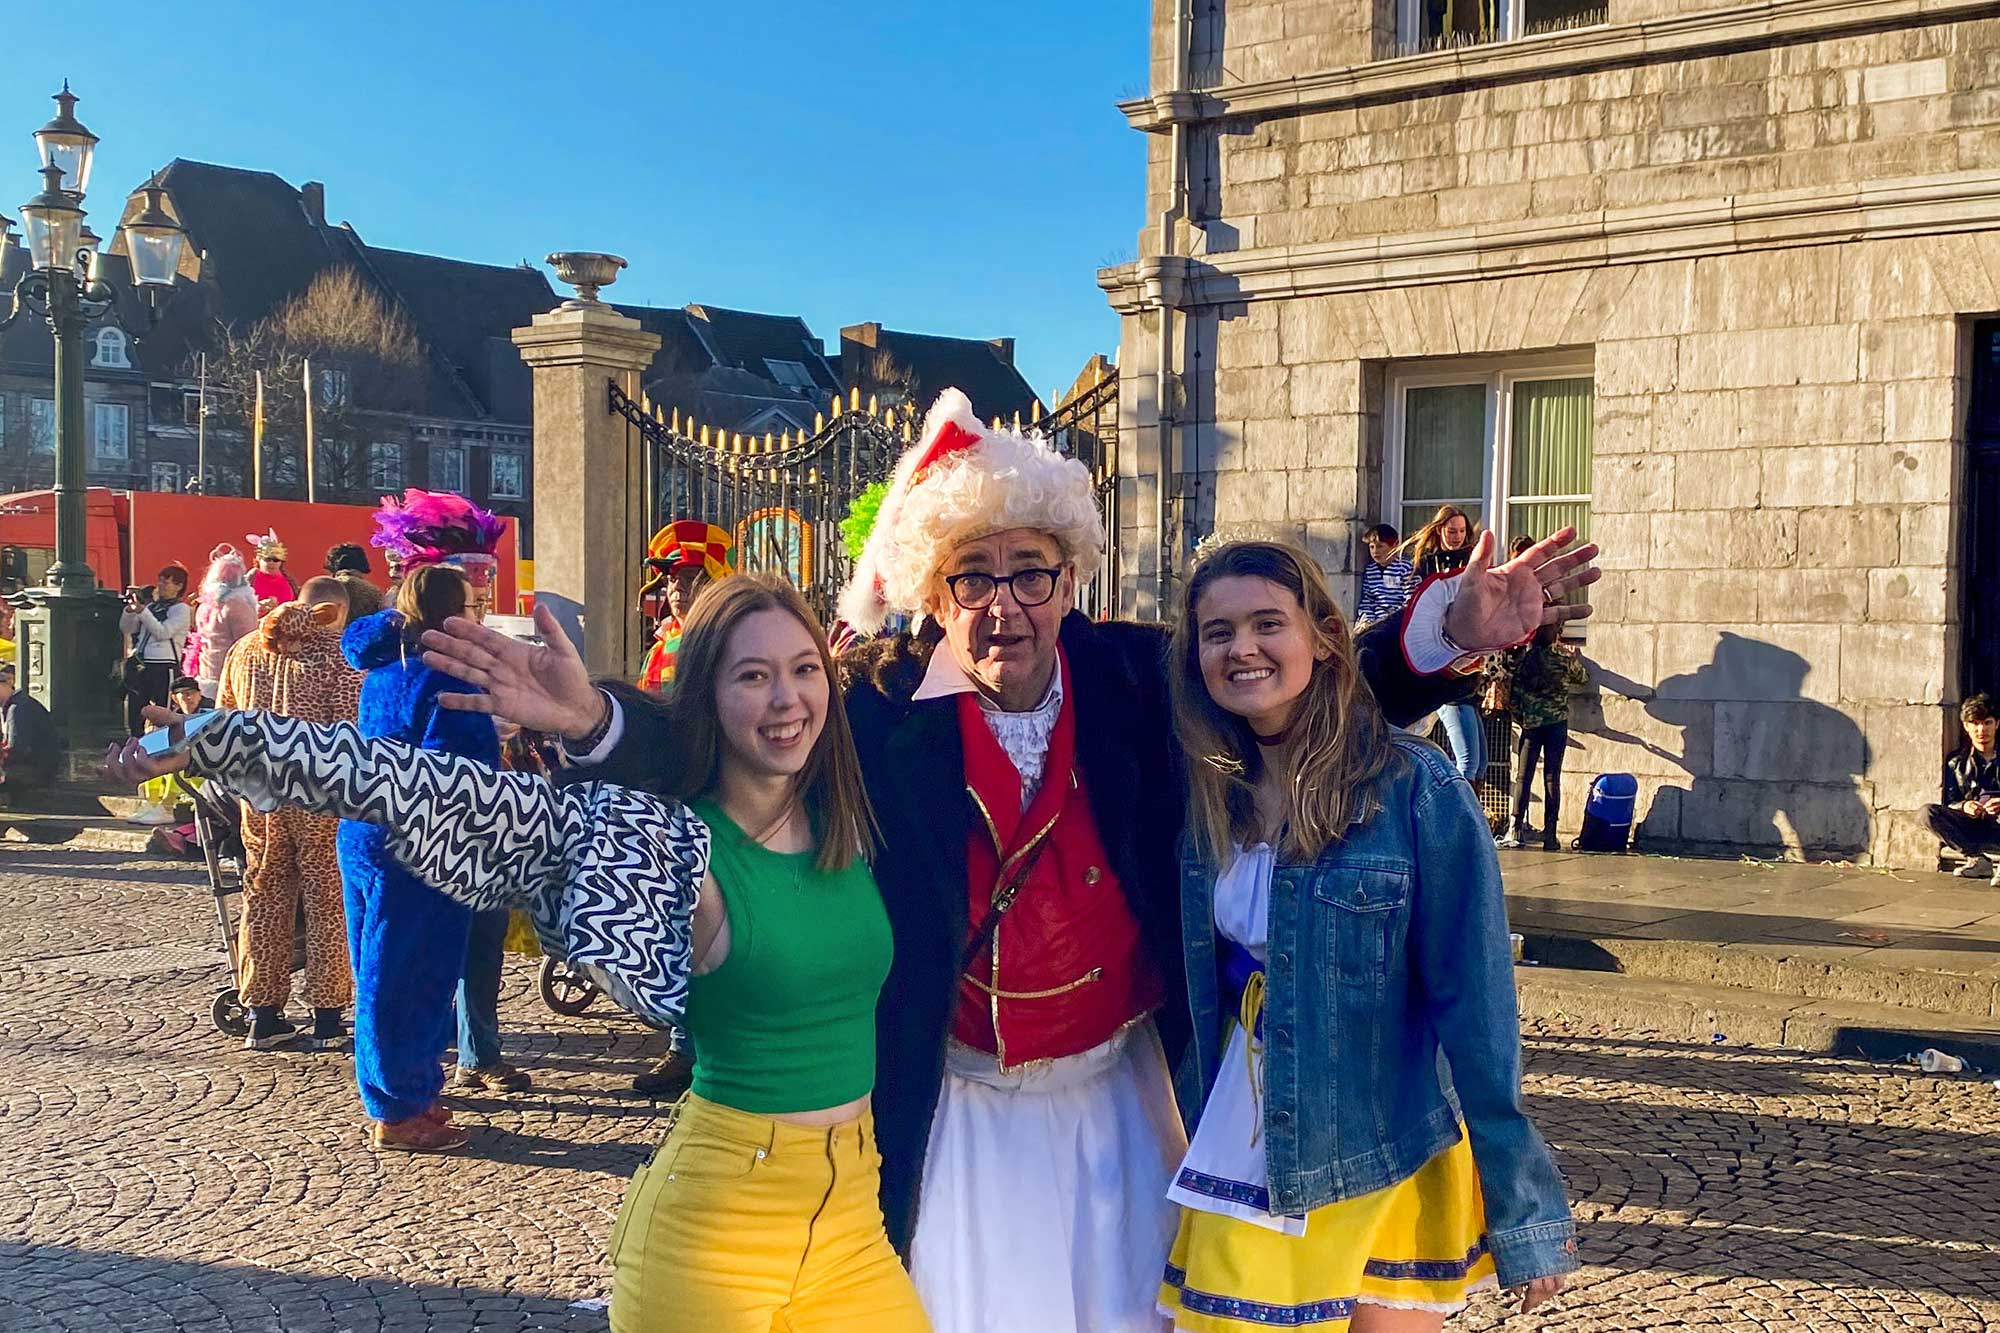 Students and carnival attendees in colorful attire at the Carnival 2022 in Maastricht.